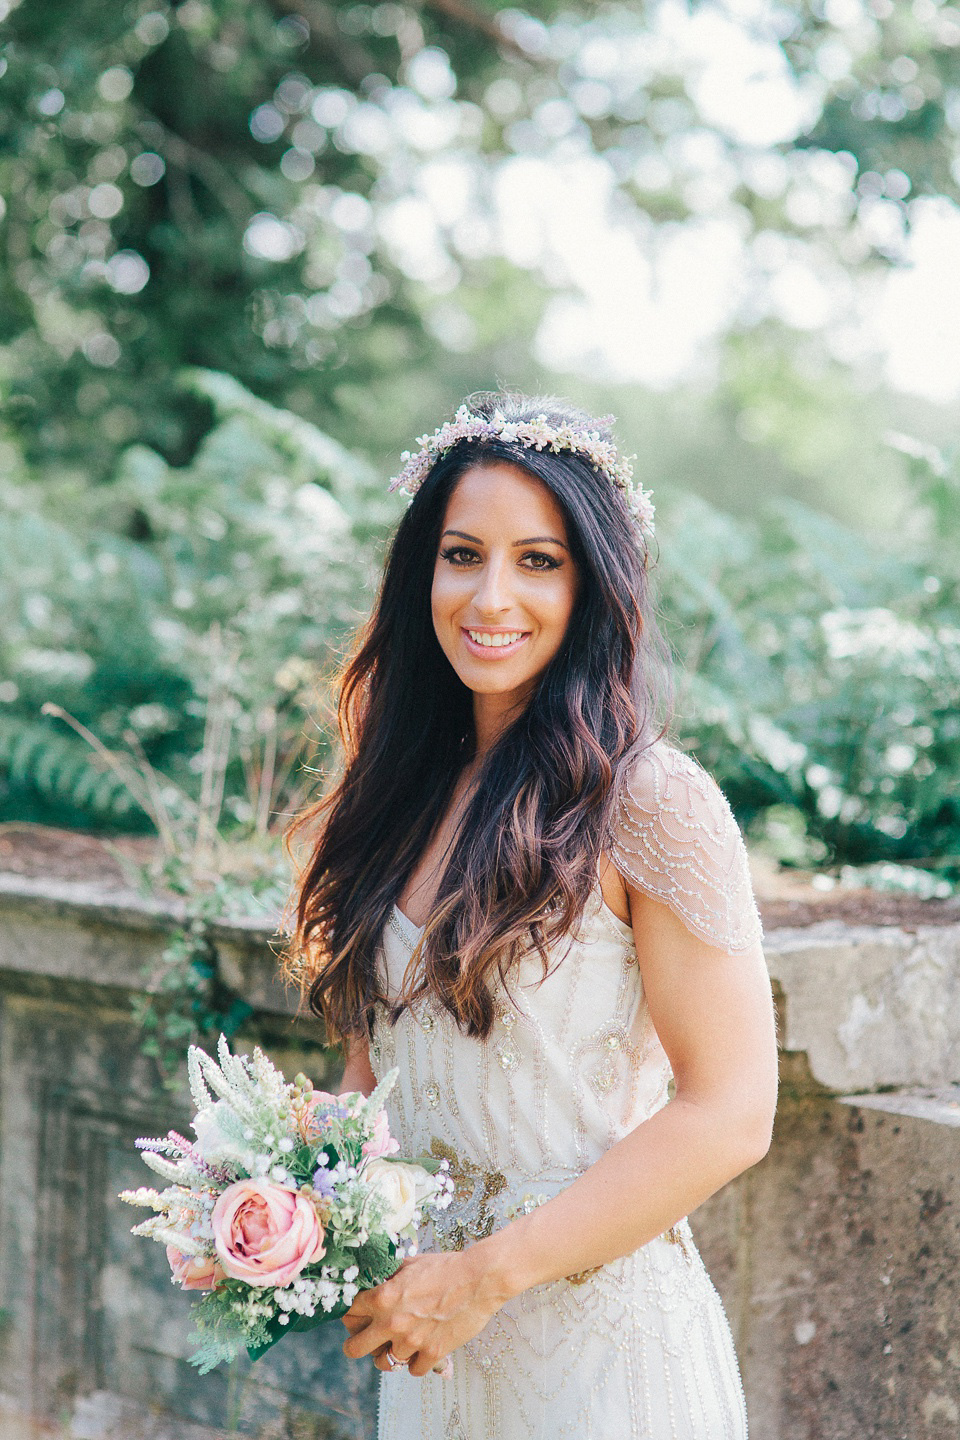 Jenny Packham's Eden and Pretty Pastel Flowers. Photography by Kylee Yee.